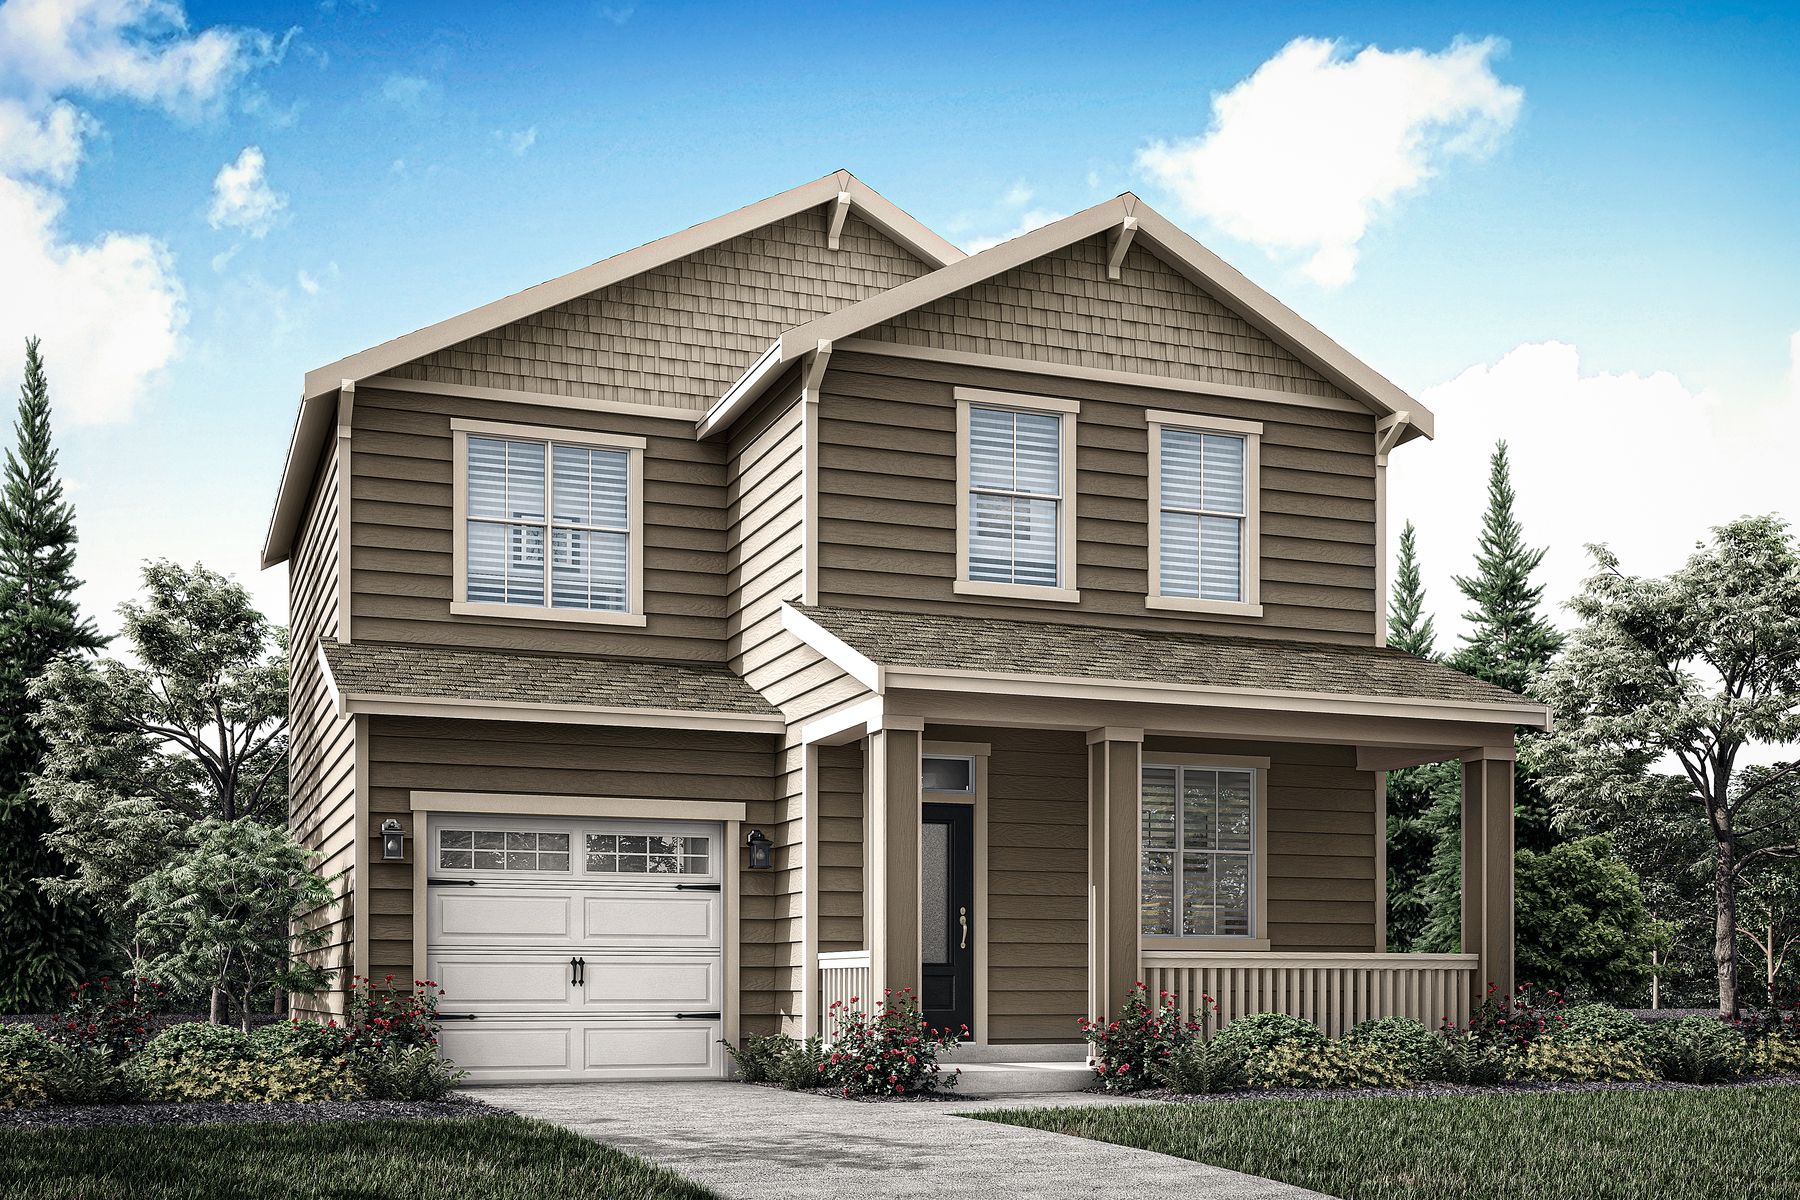 Heritage Gardens by LGI Homes:You will be proud to host family and friends in your spacious, new home at Heritage Gardens!